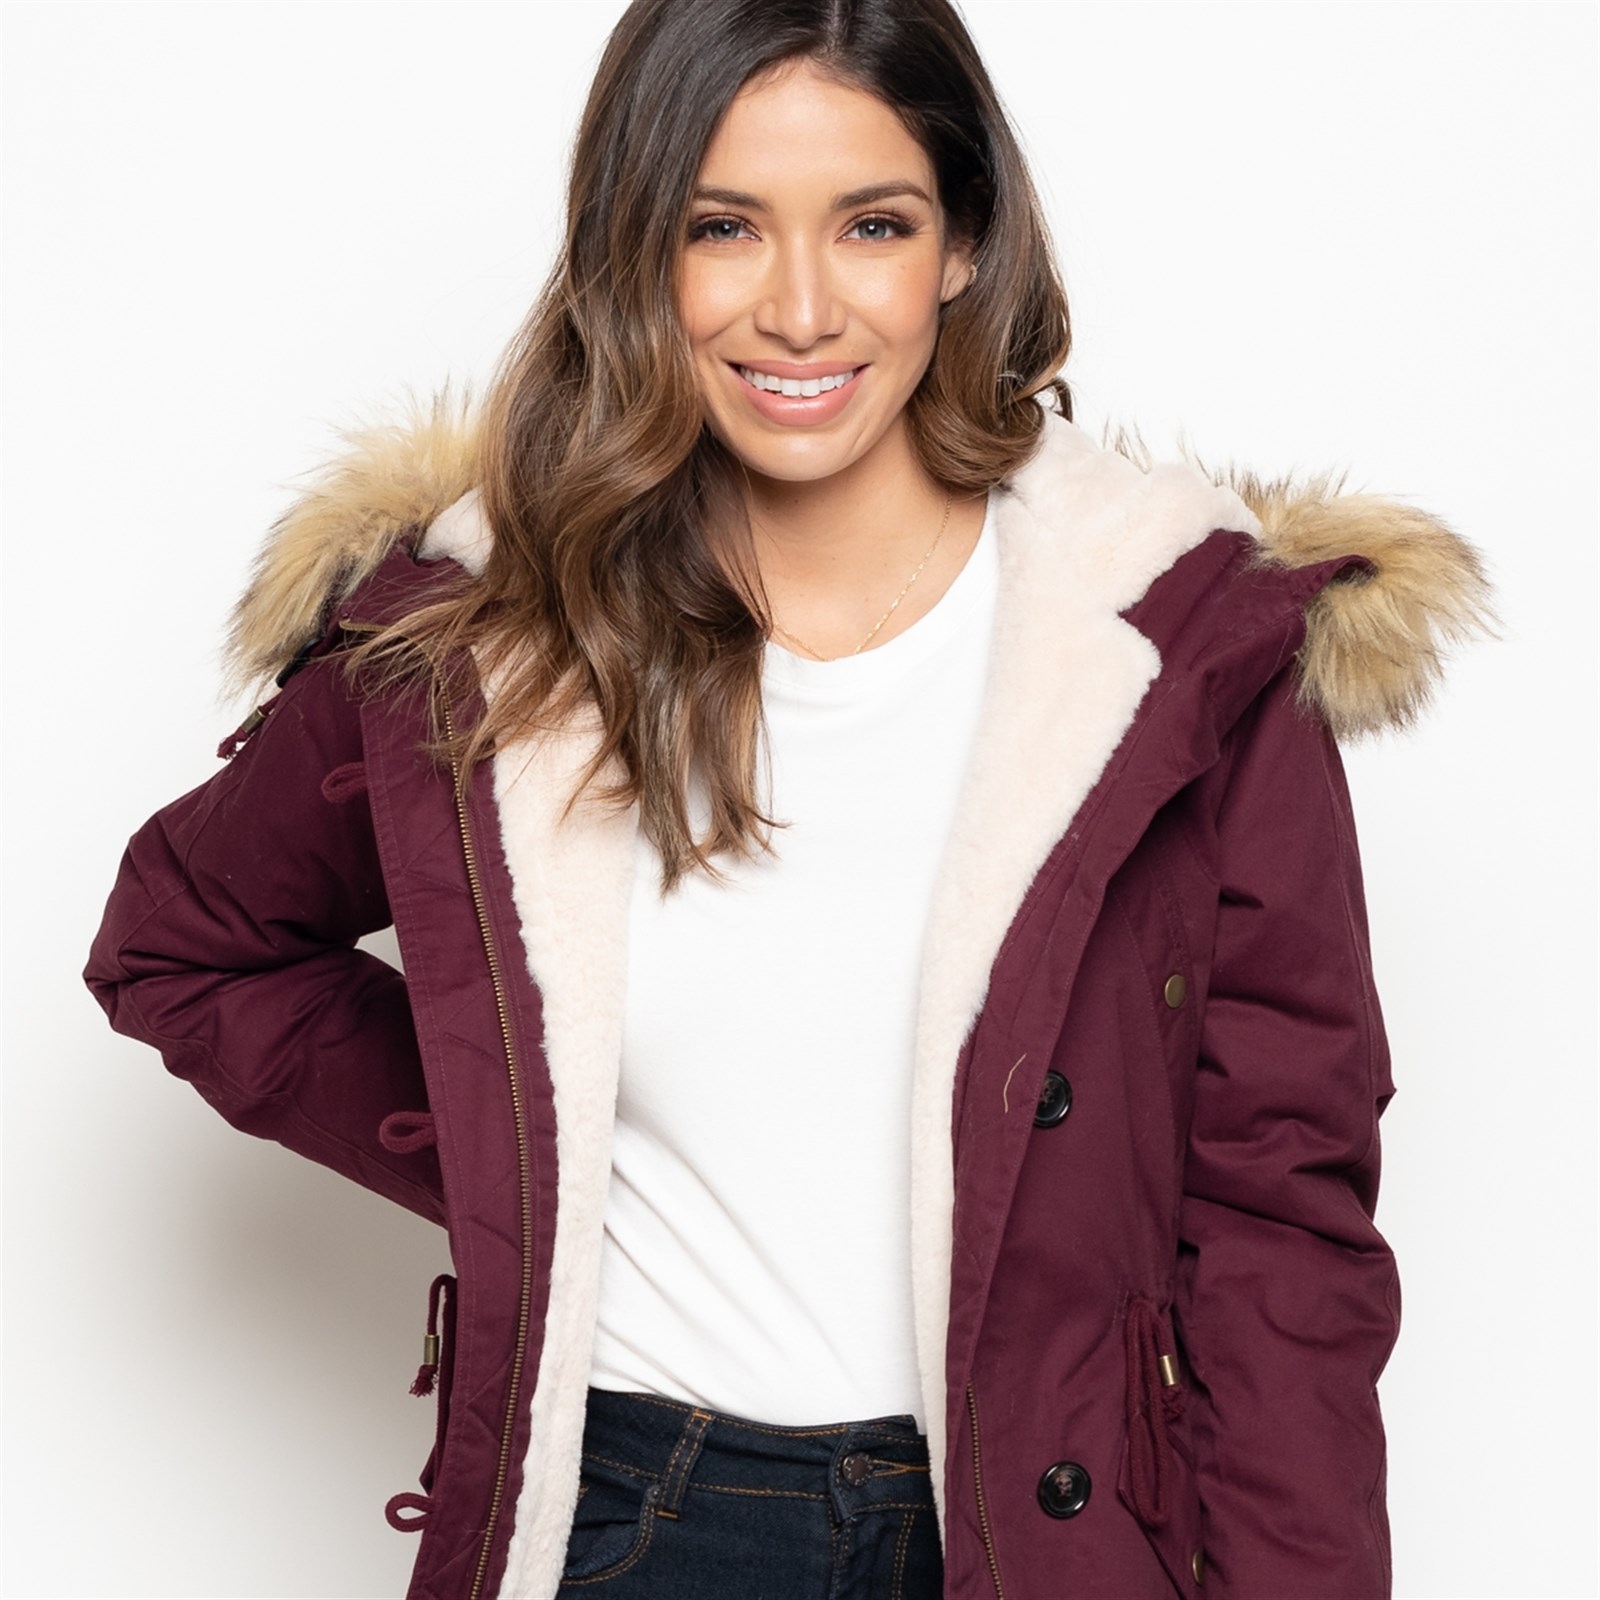 Fur Hooded Sherpa Lined Jacket ONLY $45.98 SHIPPED {Reg $72.99}